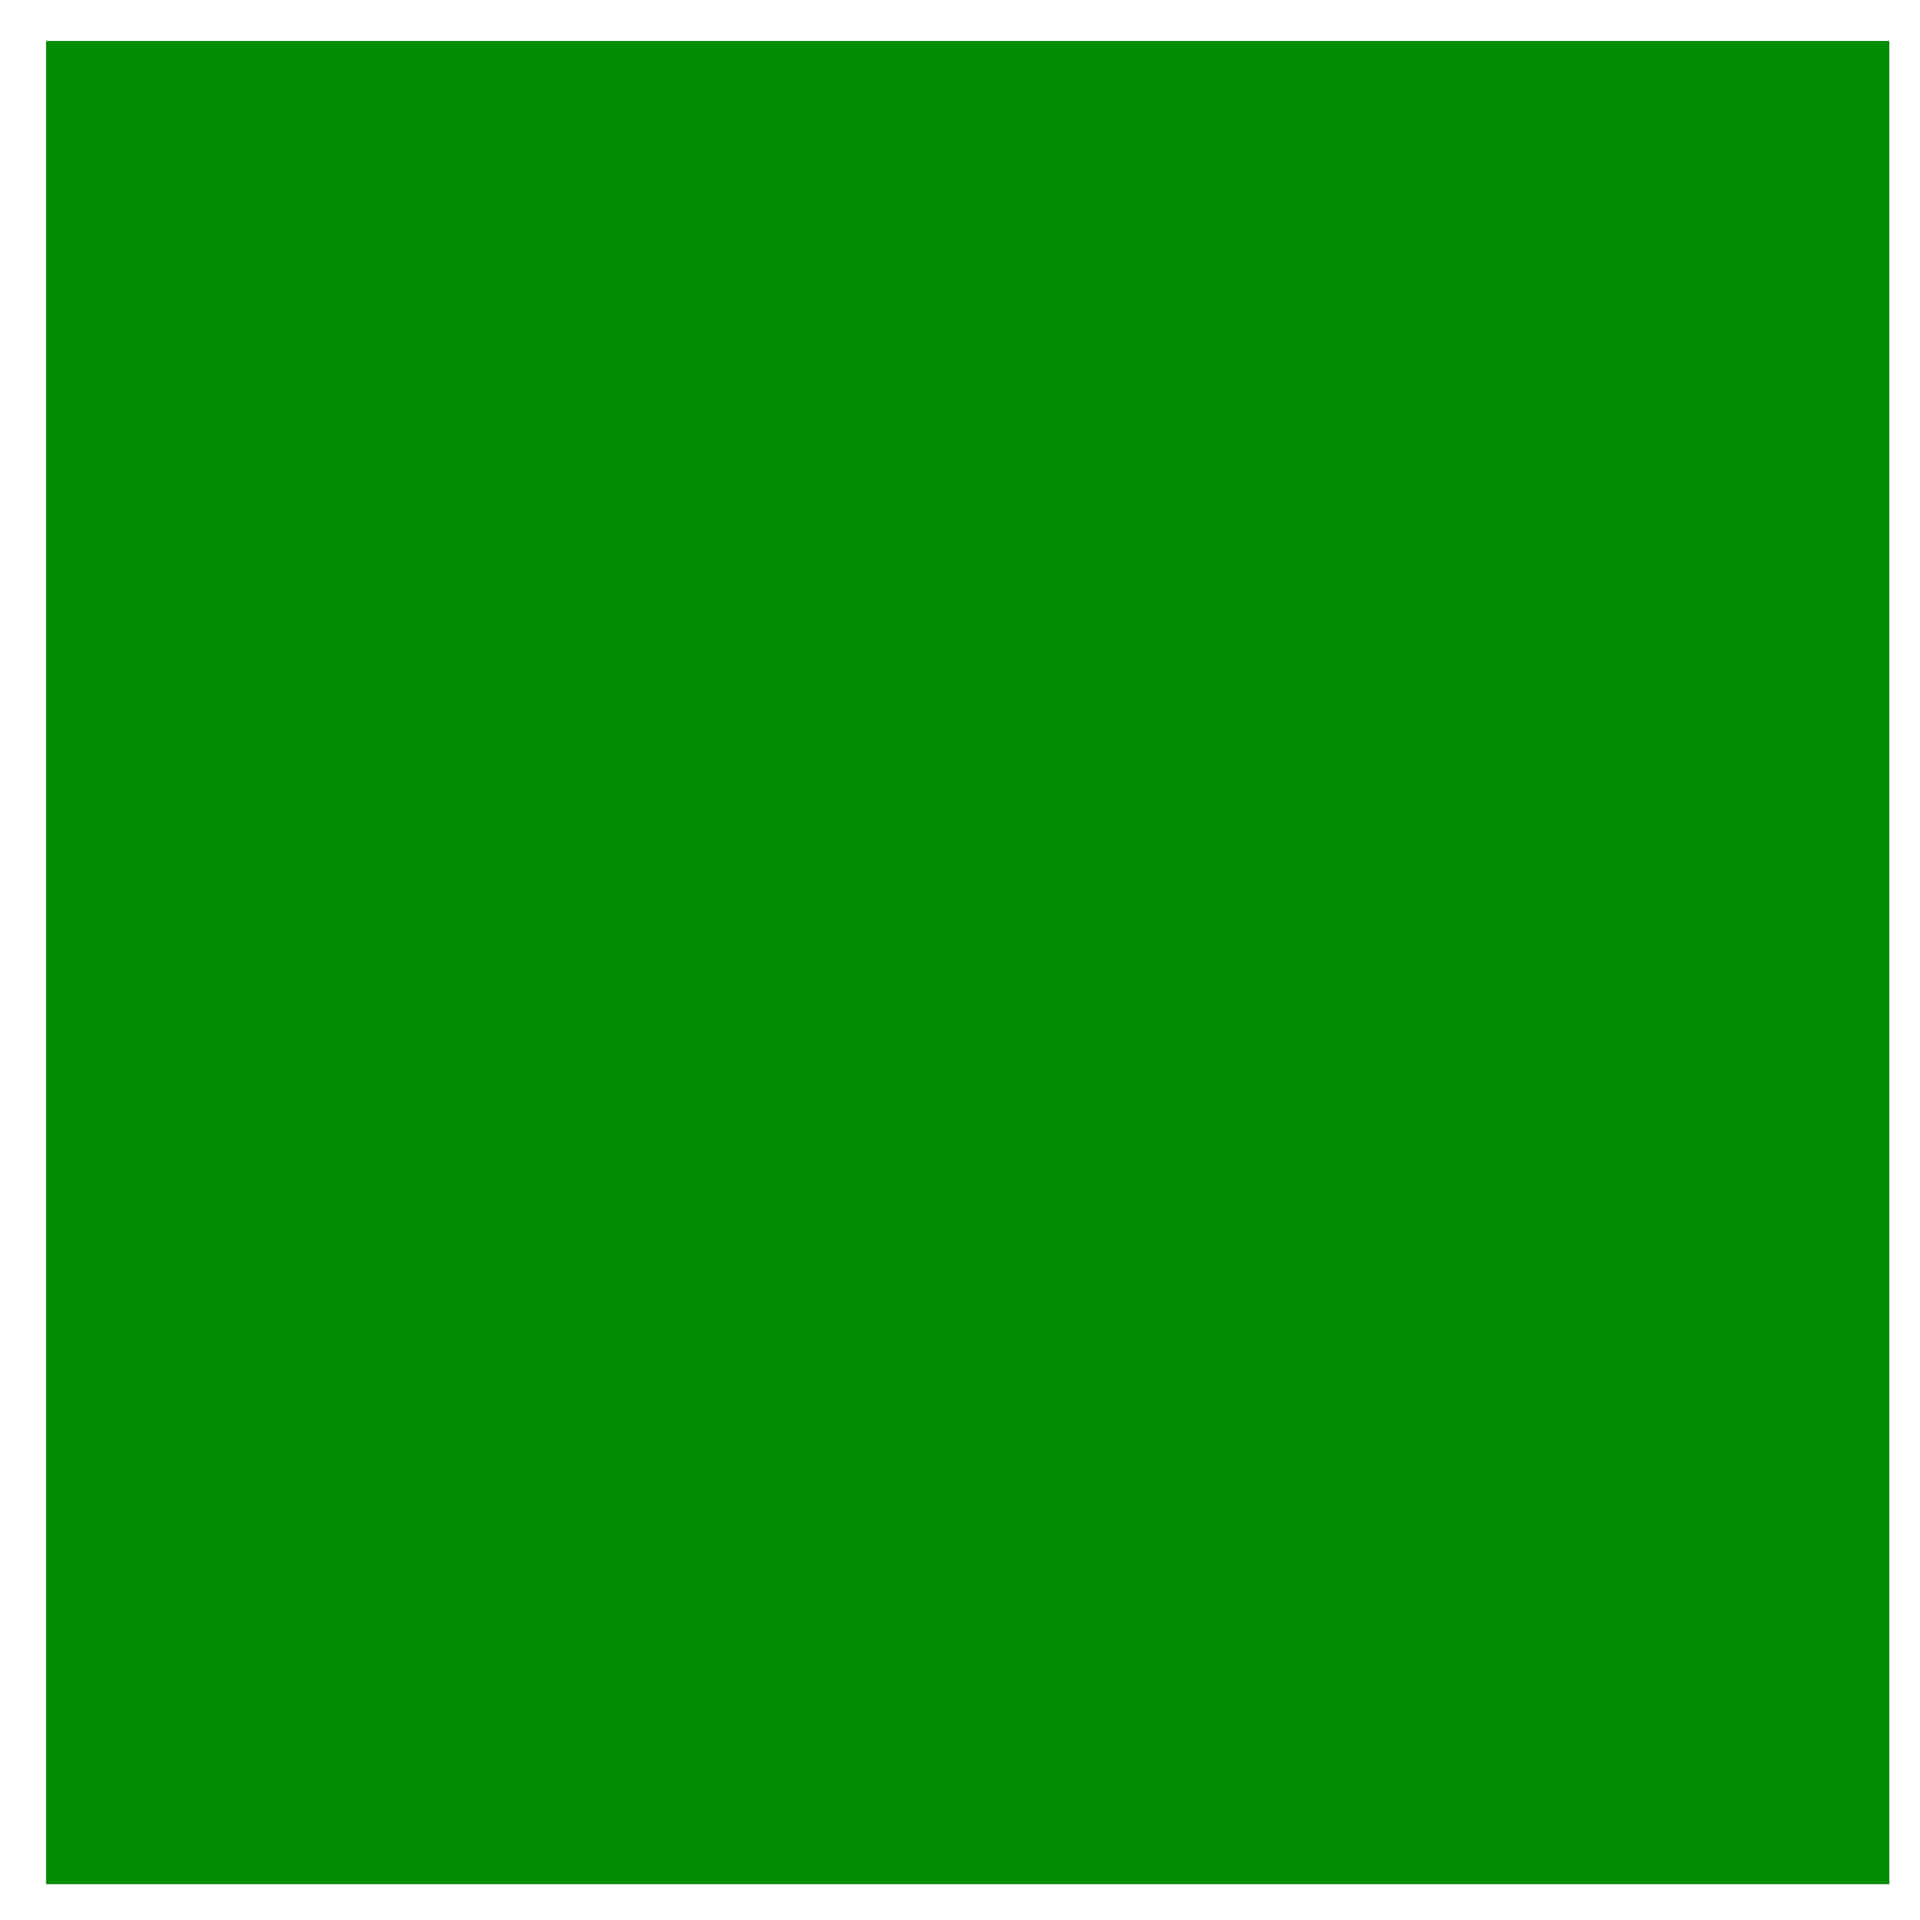 green square background with white background